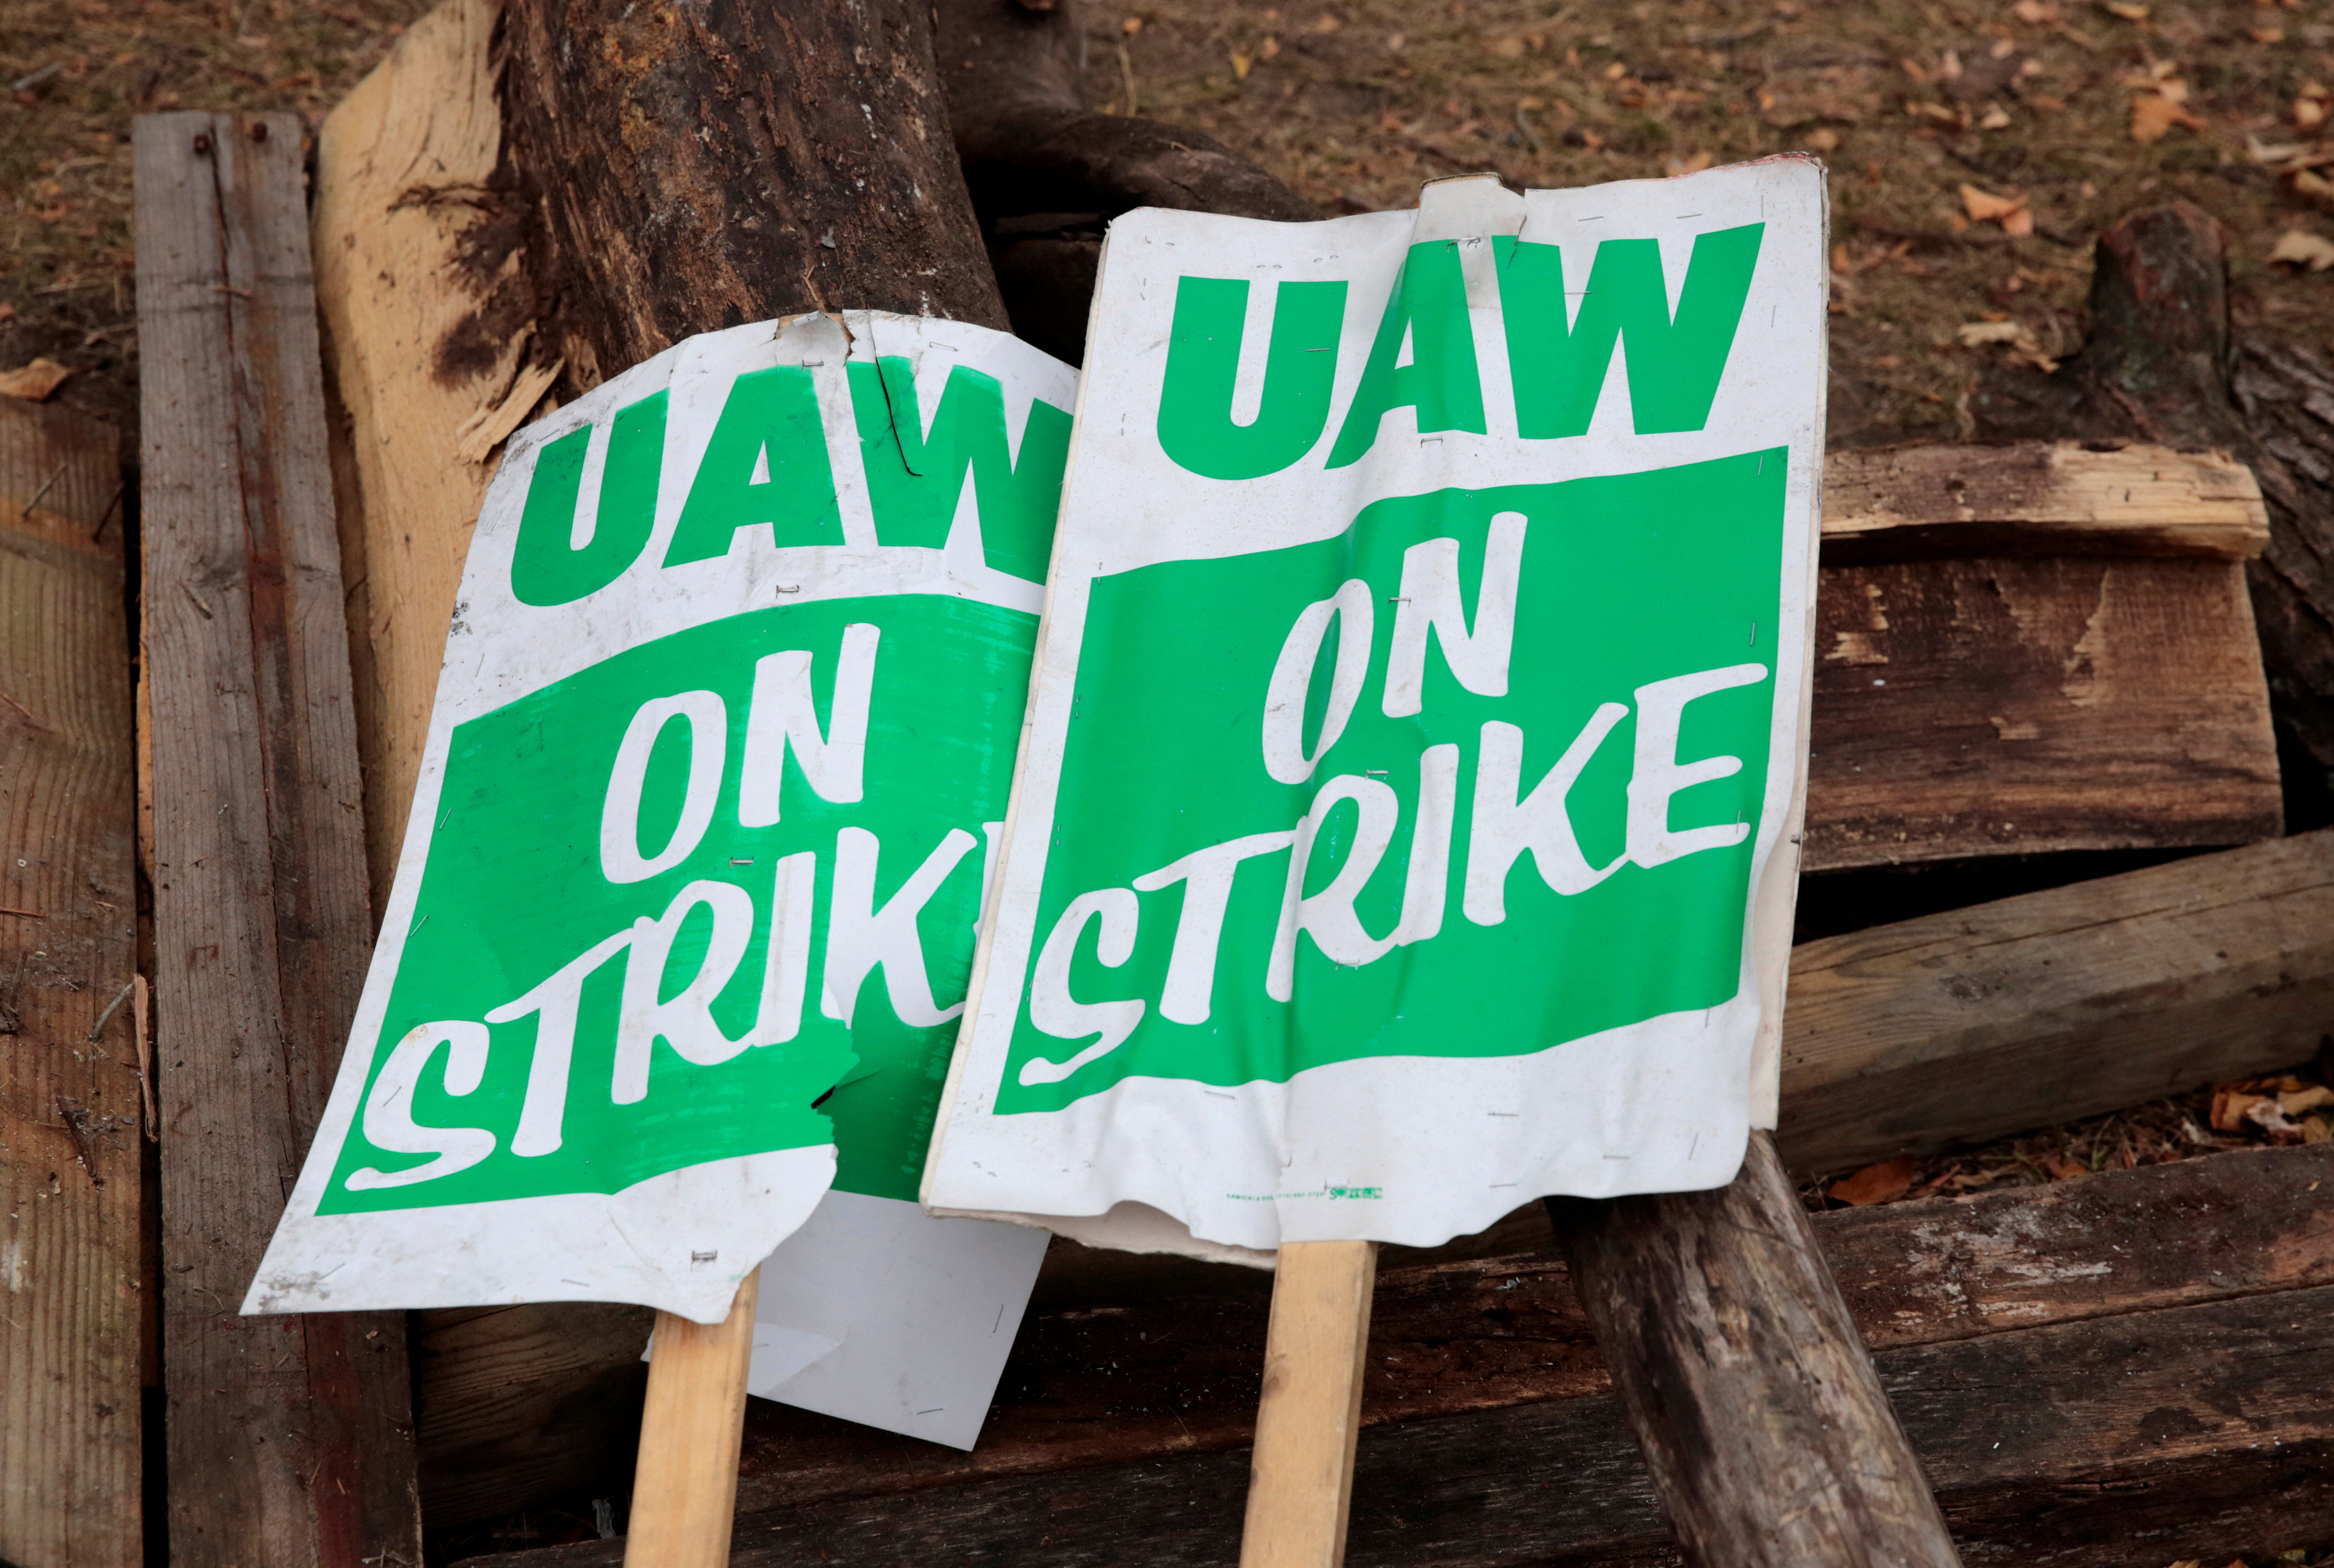 _busiFILE PHOTO: "UAW on strike" picket signs lay on a pile of wood outside the General Motors Detroit-Hamtramck Assembly in Hamtramck